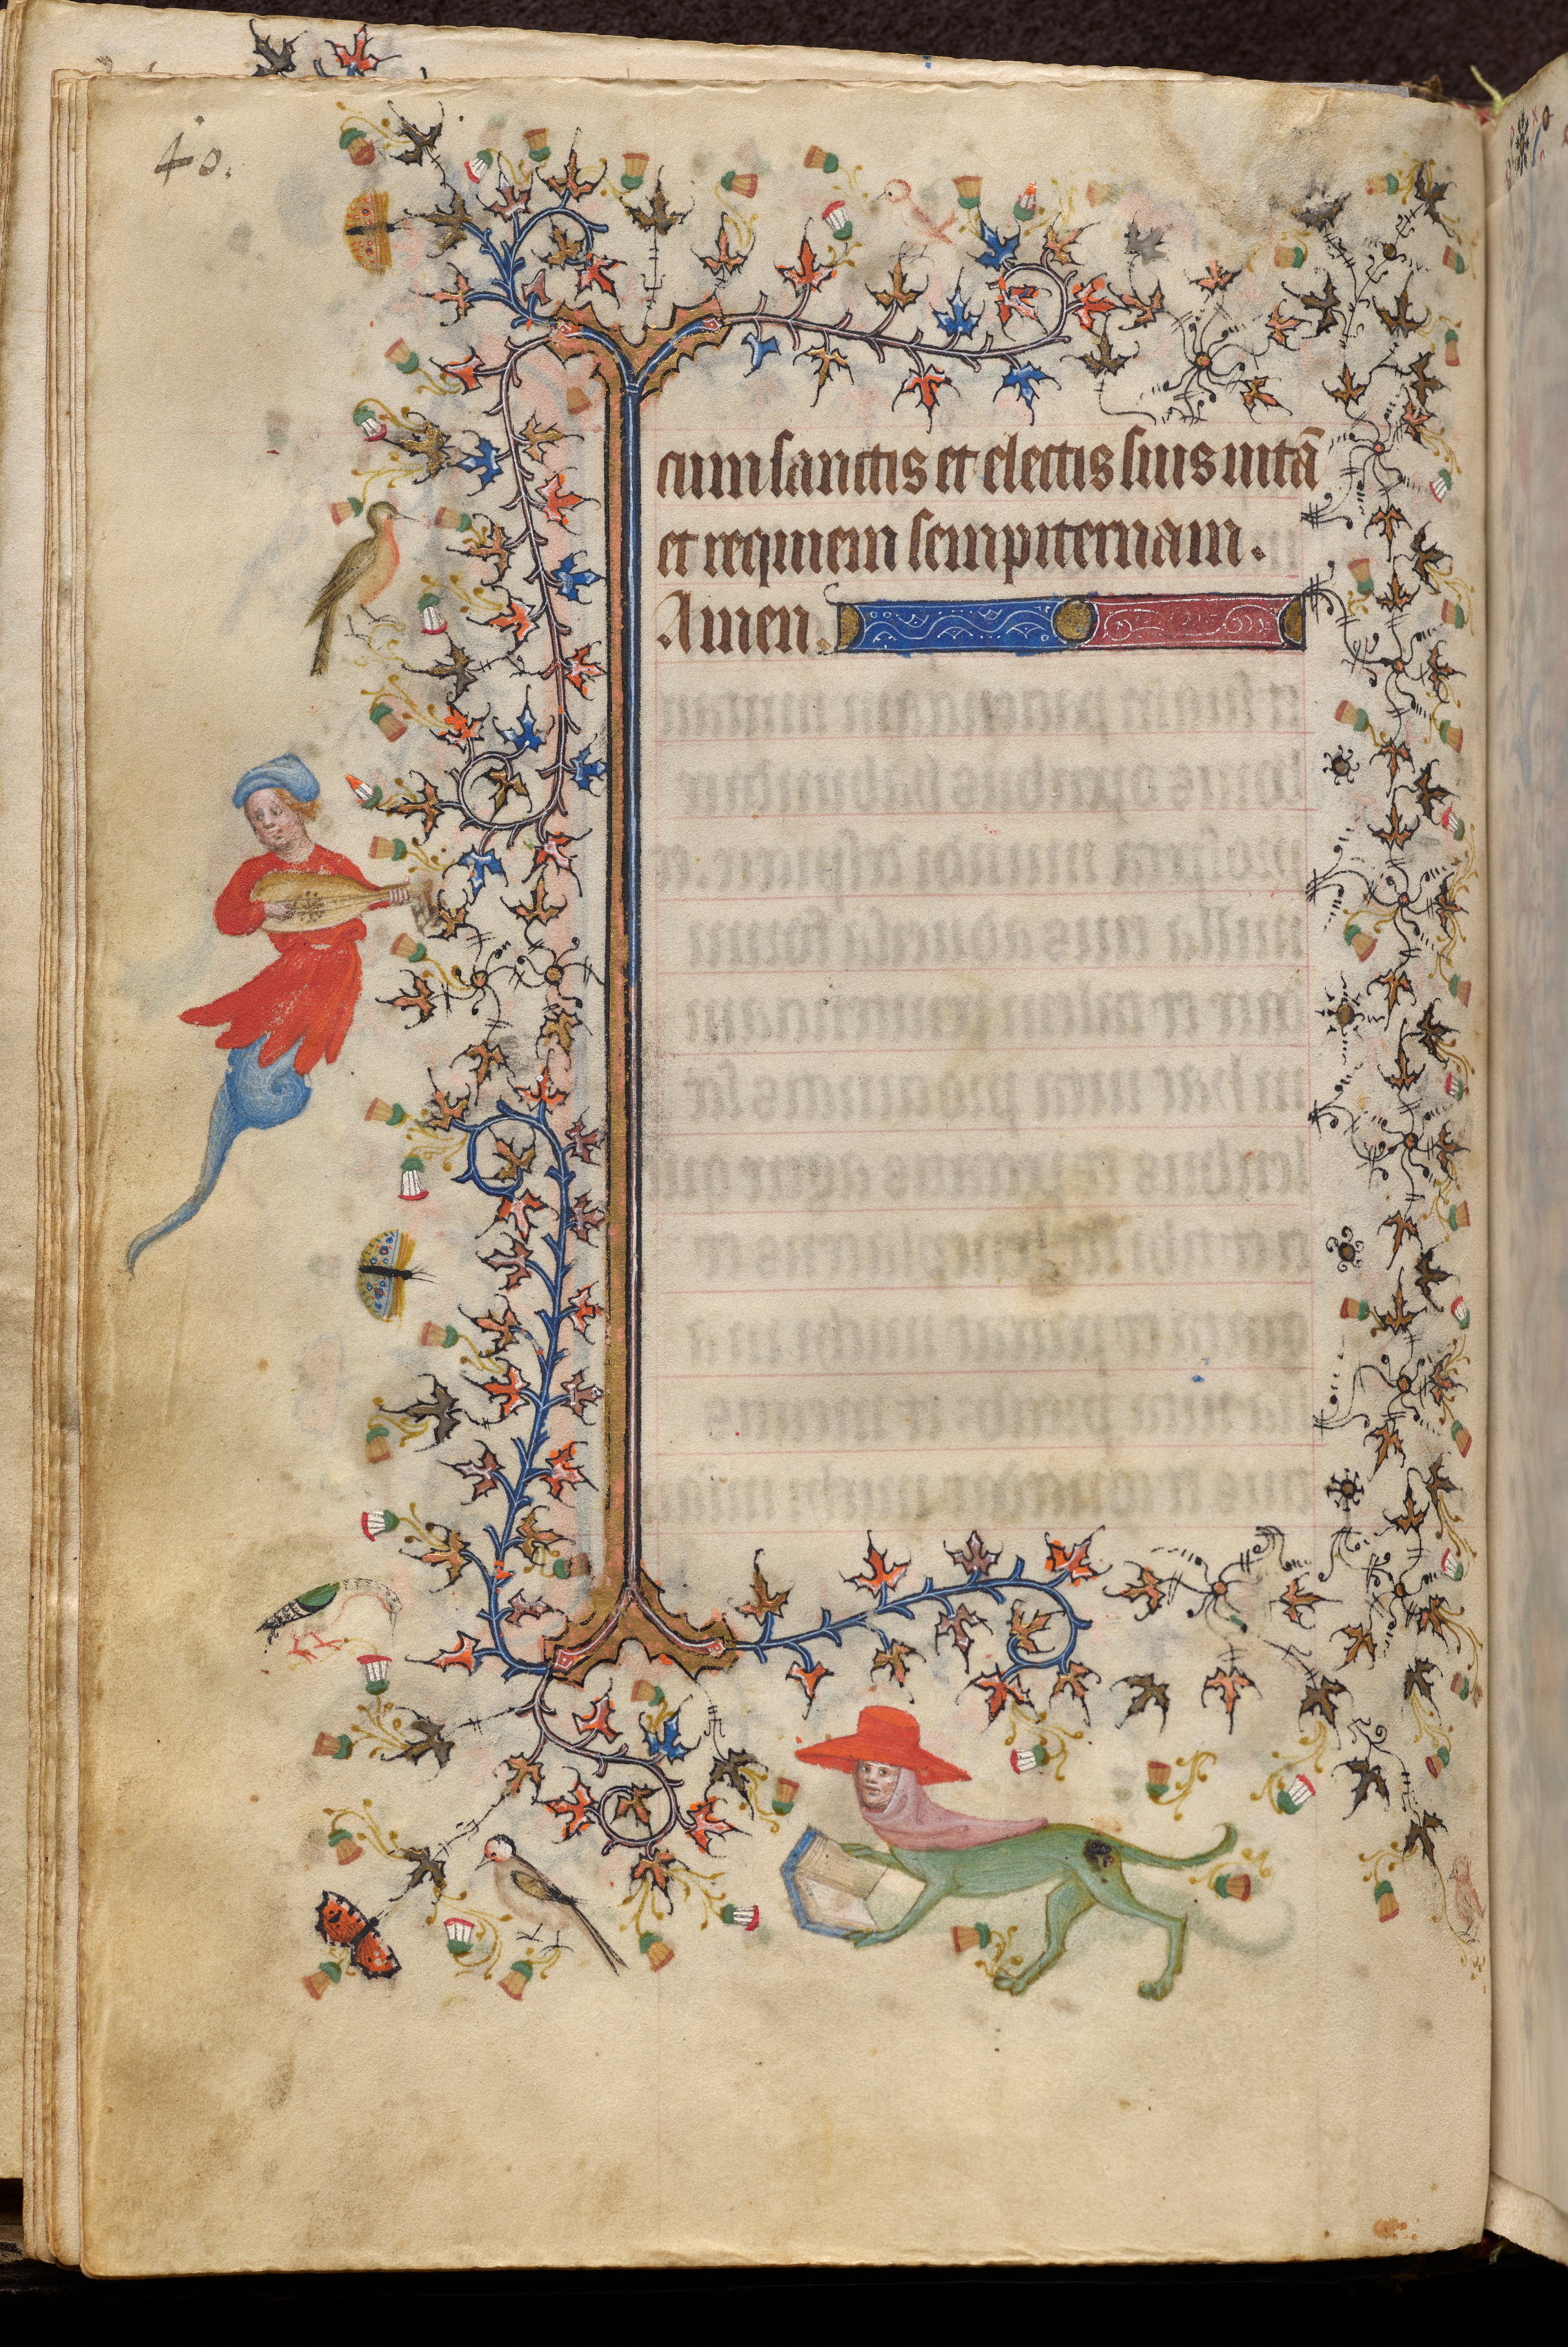 Hours of Charles the Noble, King of Navarre (1361-1425): fol. 20v, Text